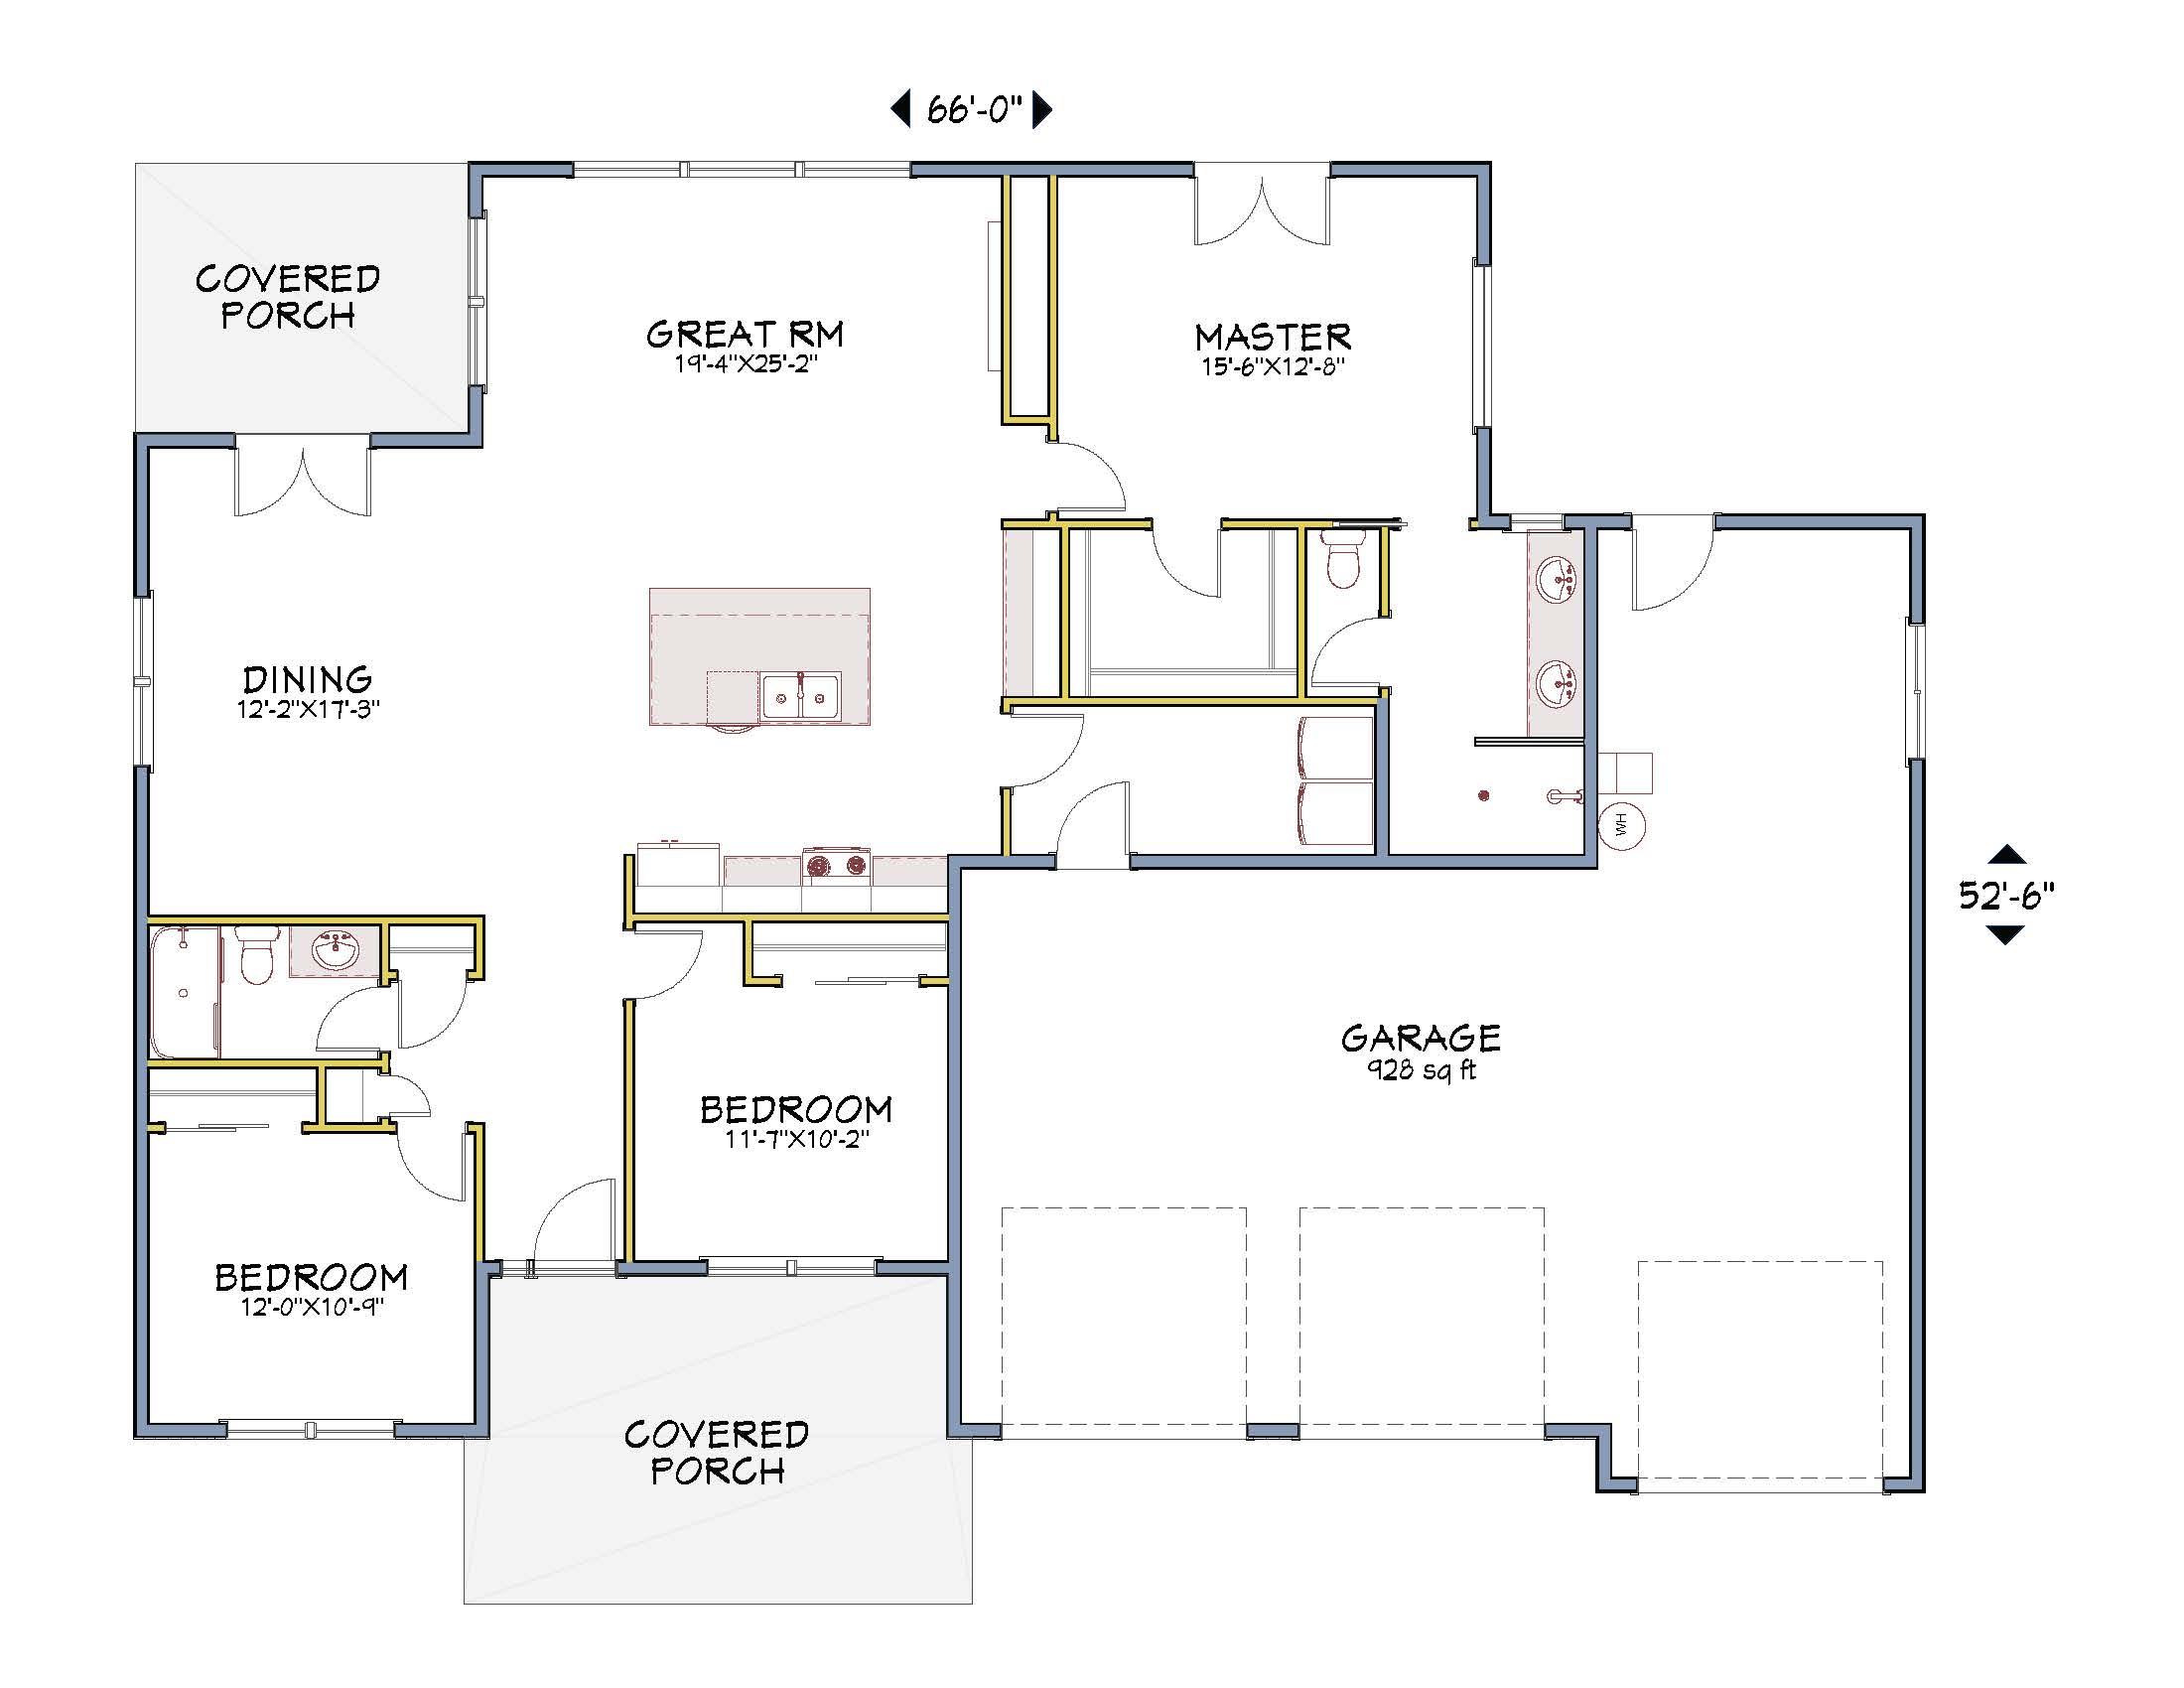 Floor plan of modern home by Design NW